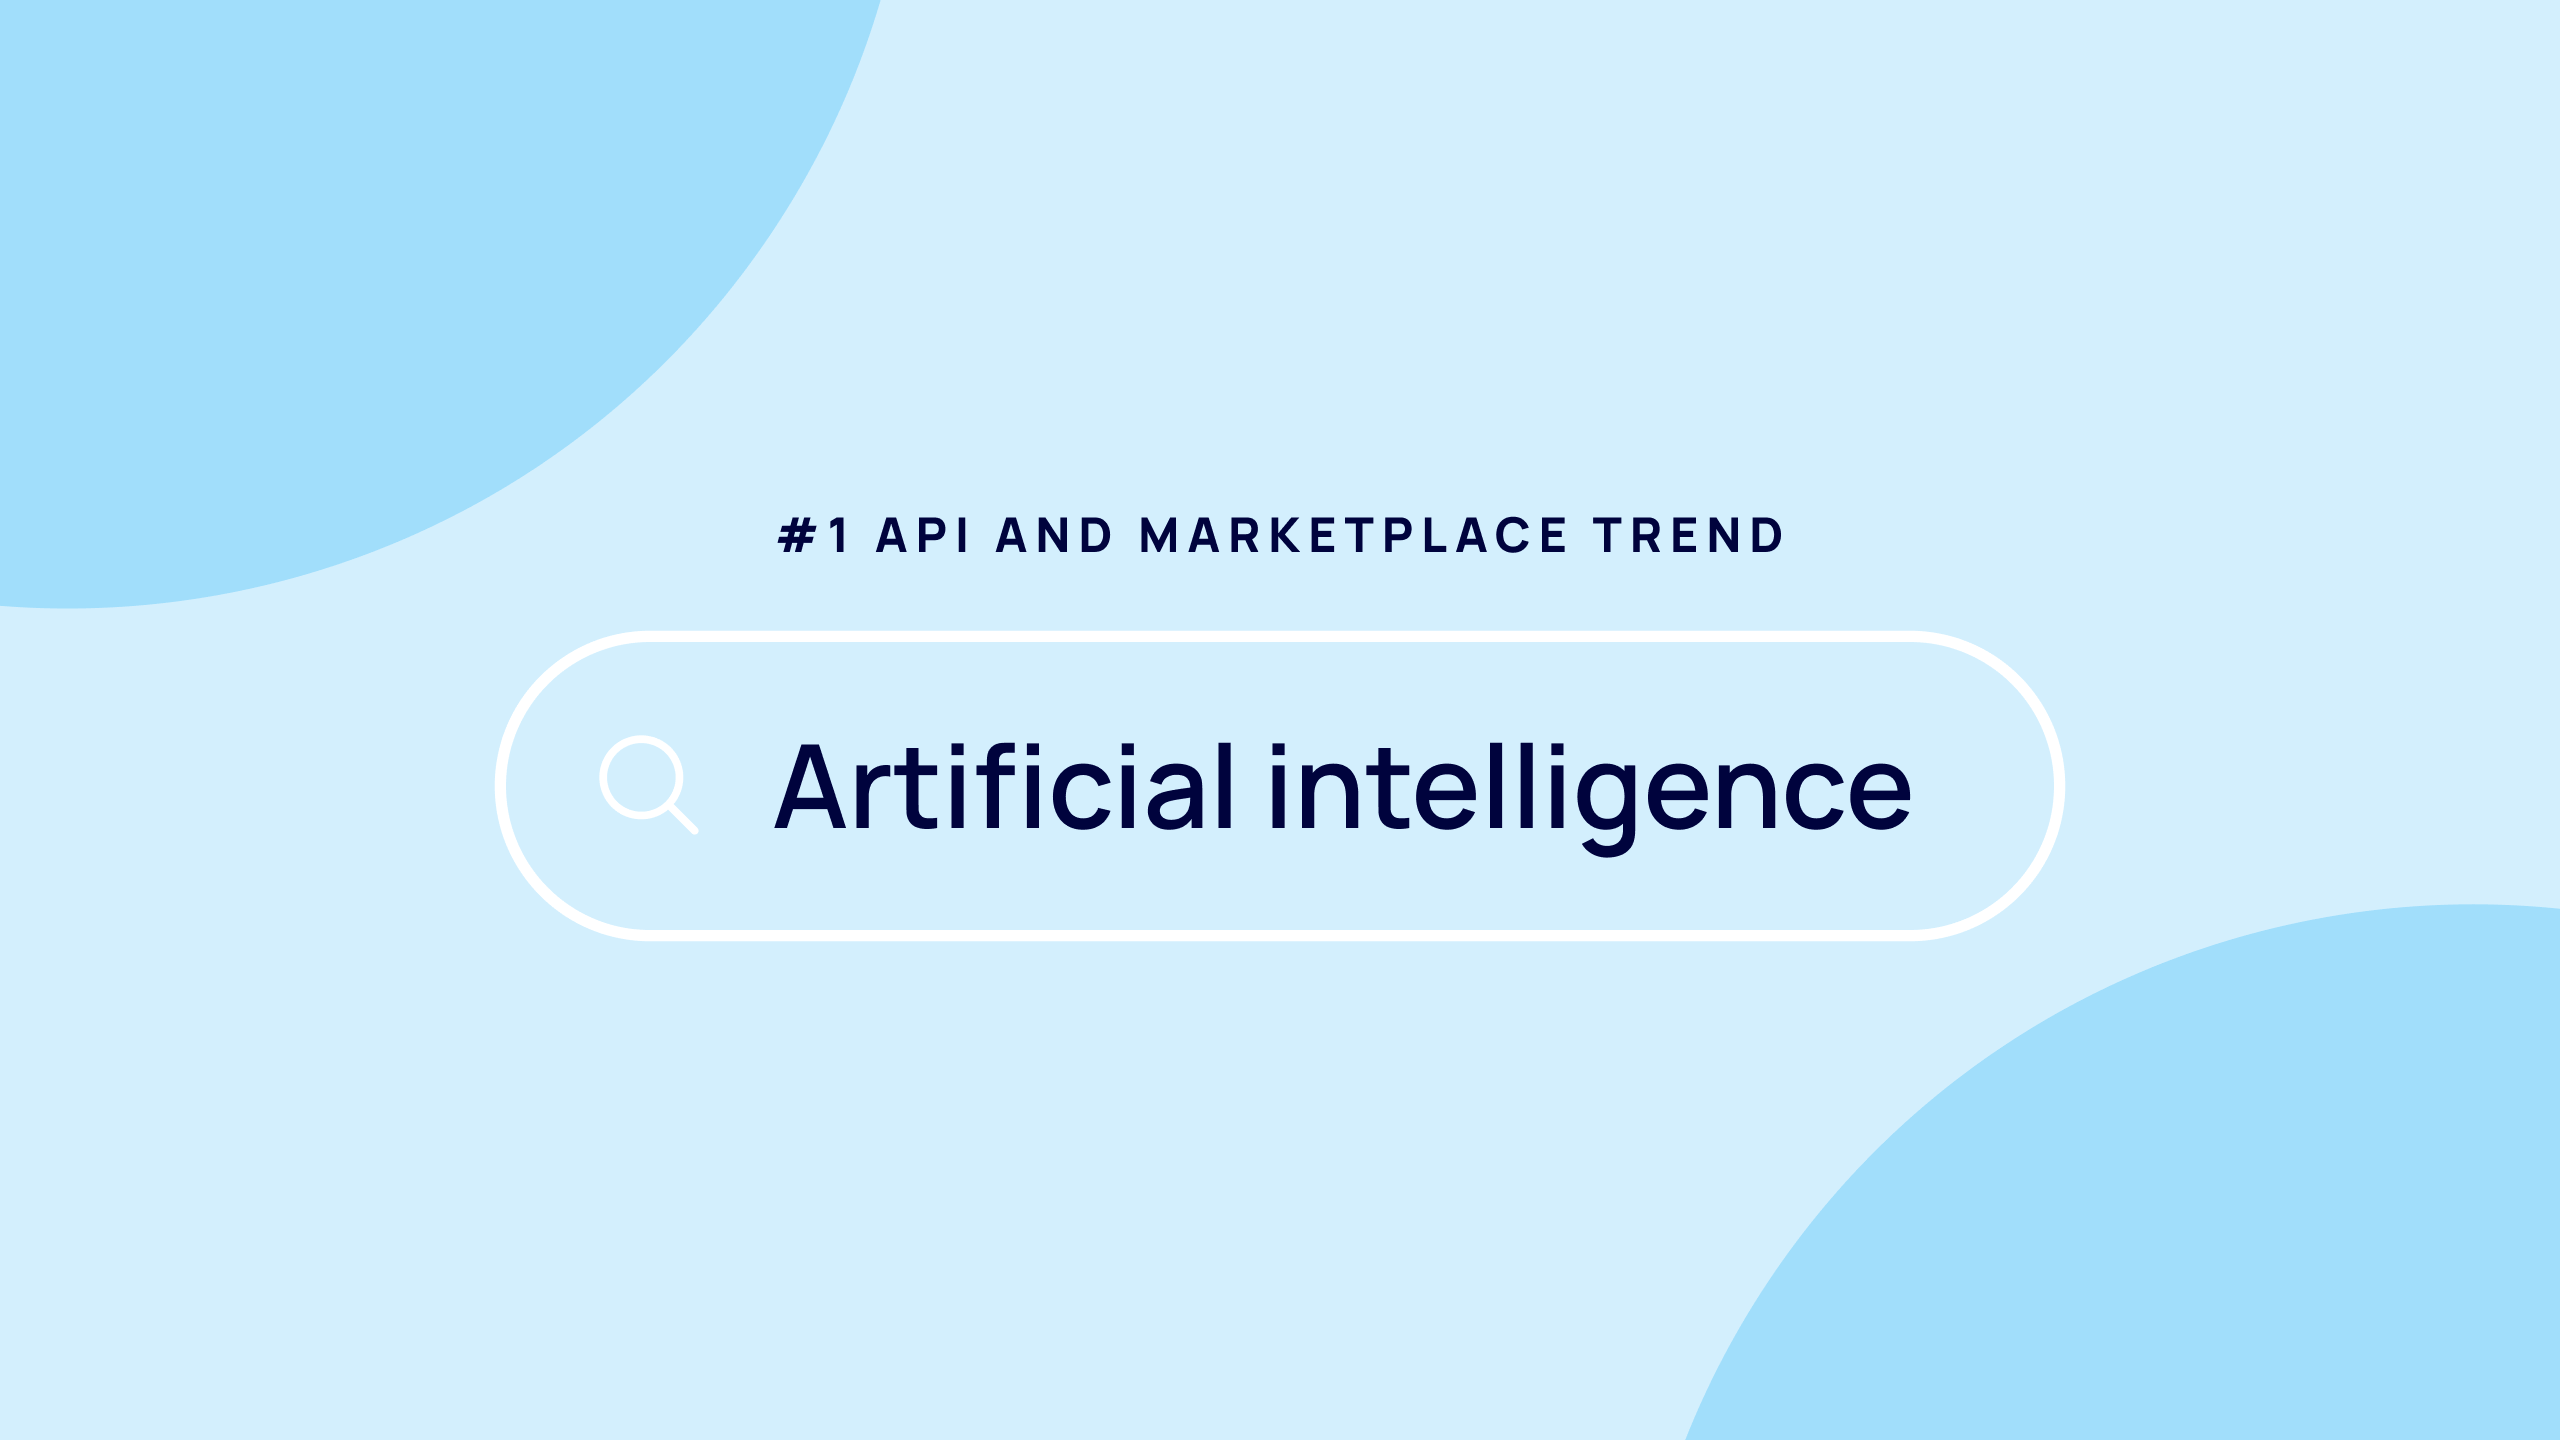 A search bar with "Articificial intelligence" as the query. Above the search is text that reads "#1 API and marketplace trend."